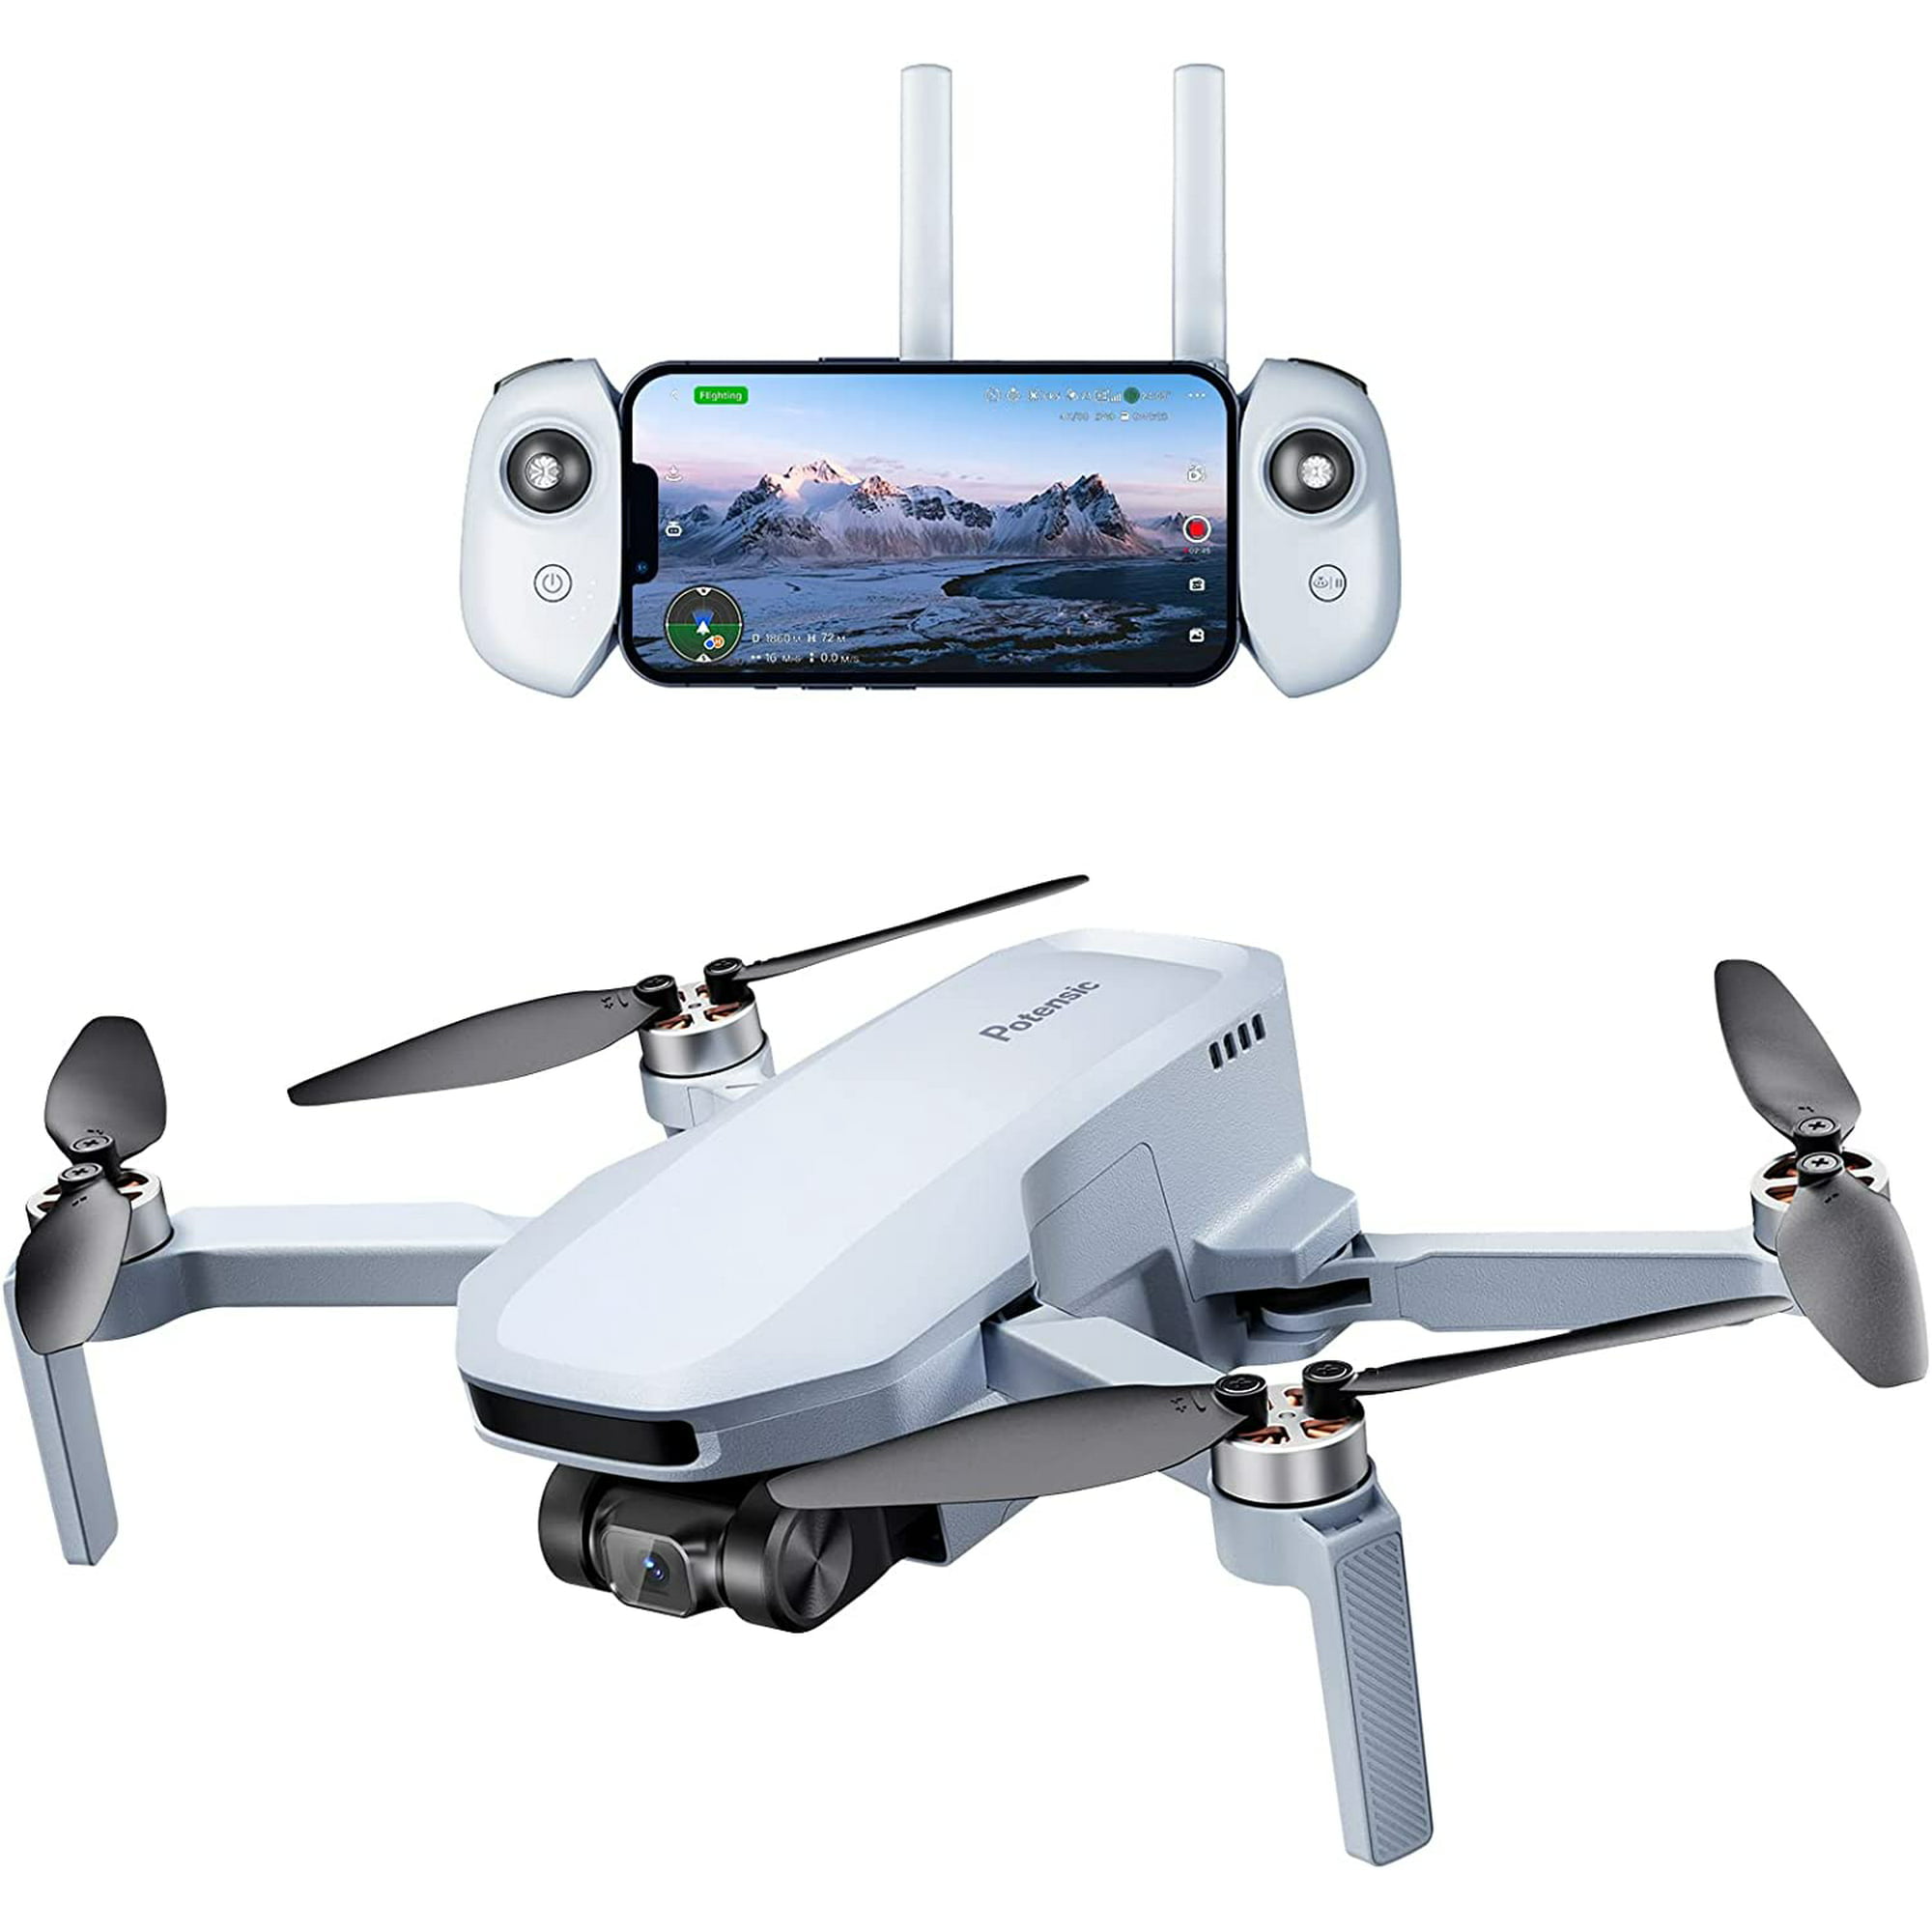 Potensic Atom SE GPS Drone Almost Became COMPETITION! Full Review